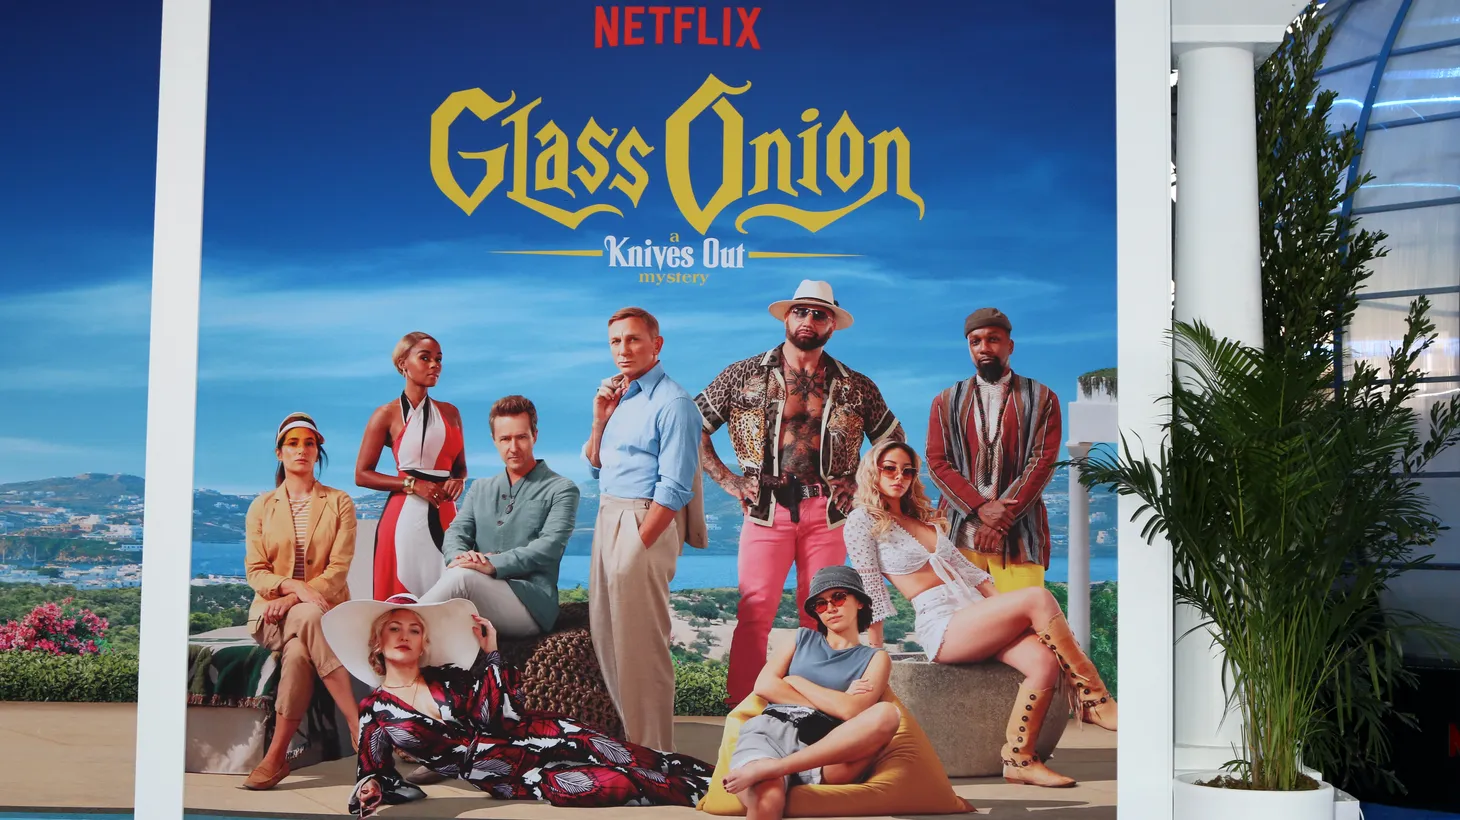 “For the theater owners, this is like Netflix showing them a big juicy cheeseburger, letting them take a bite, and then yanking it back,” says Matt Belloni, founding partner of Puck News. A sign of the film "Glass Onion - A Knives Out Mystery" posted at its Premiere at Motion Picture Academy Museum in Los Angeles, on November 14, 2022.